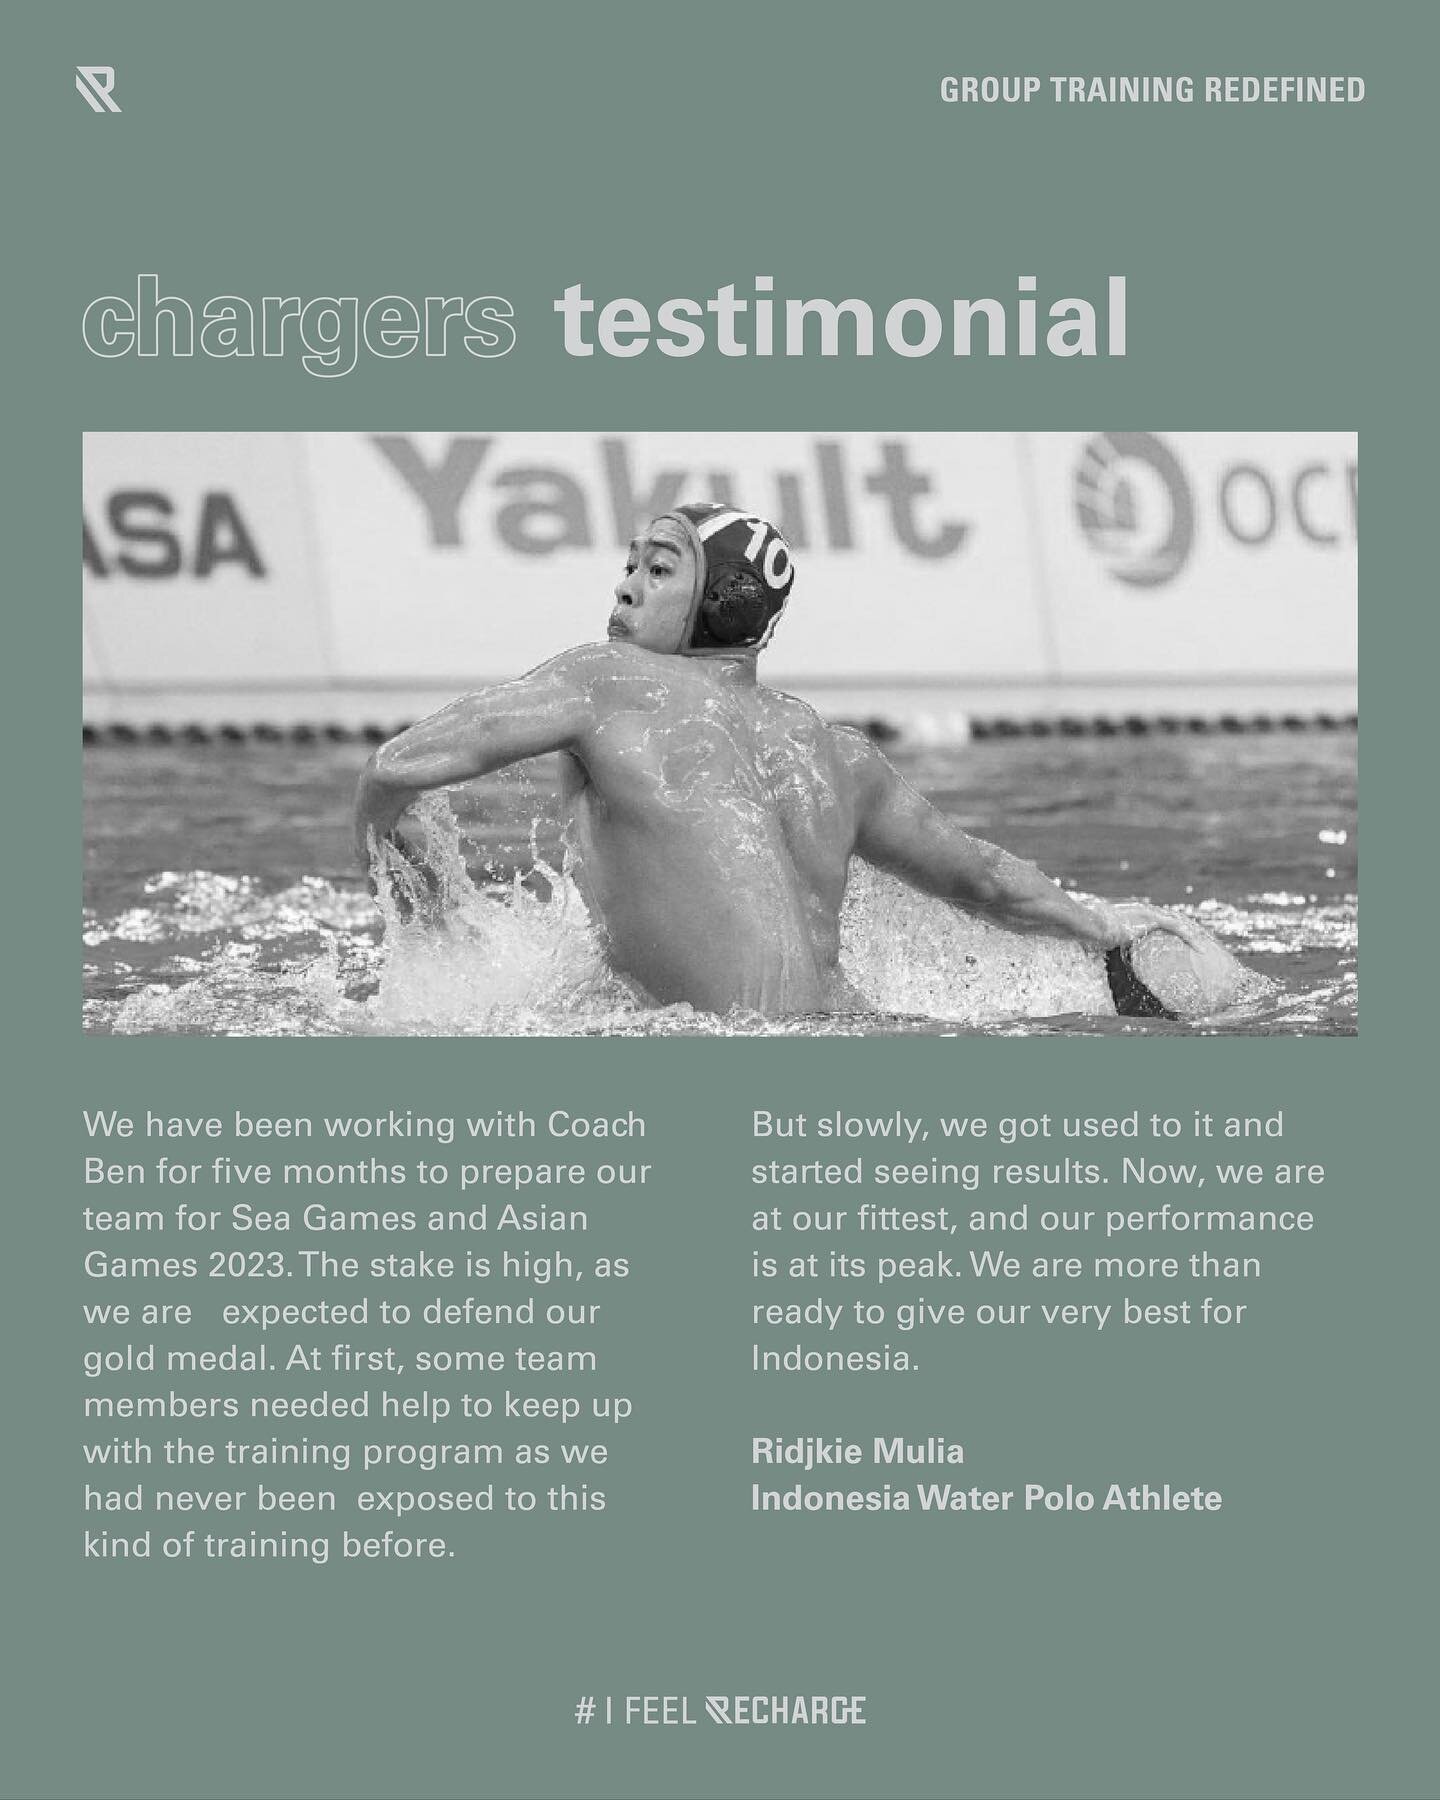 Ridjkie (@ridjkiedot ) of the national water polo team has been working and building victory with Coach Bene (@coach.bene ). He and his team feels that they are at their fittest and their performance is at its peak.

For more information about Person